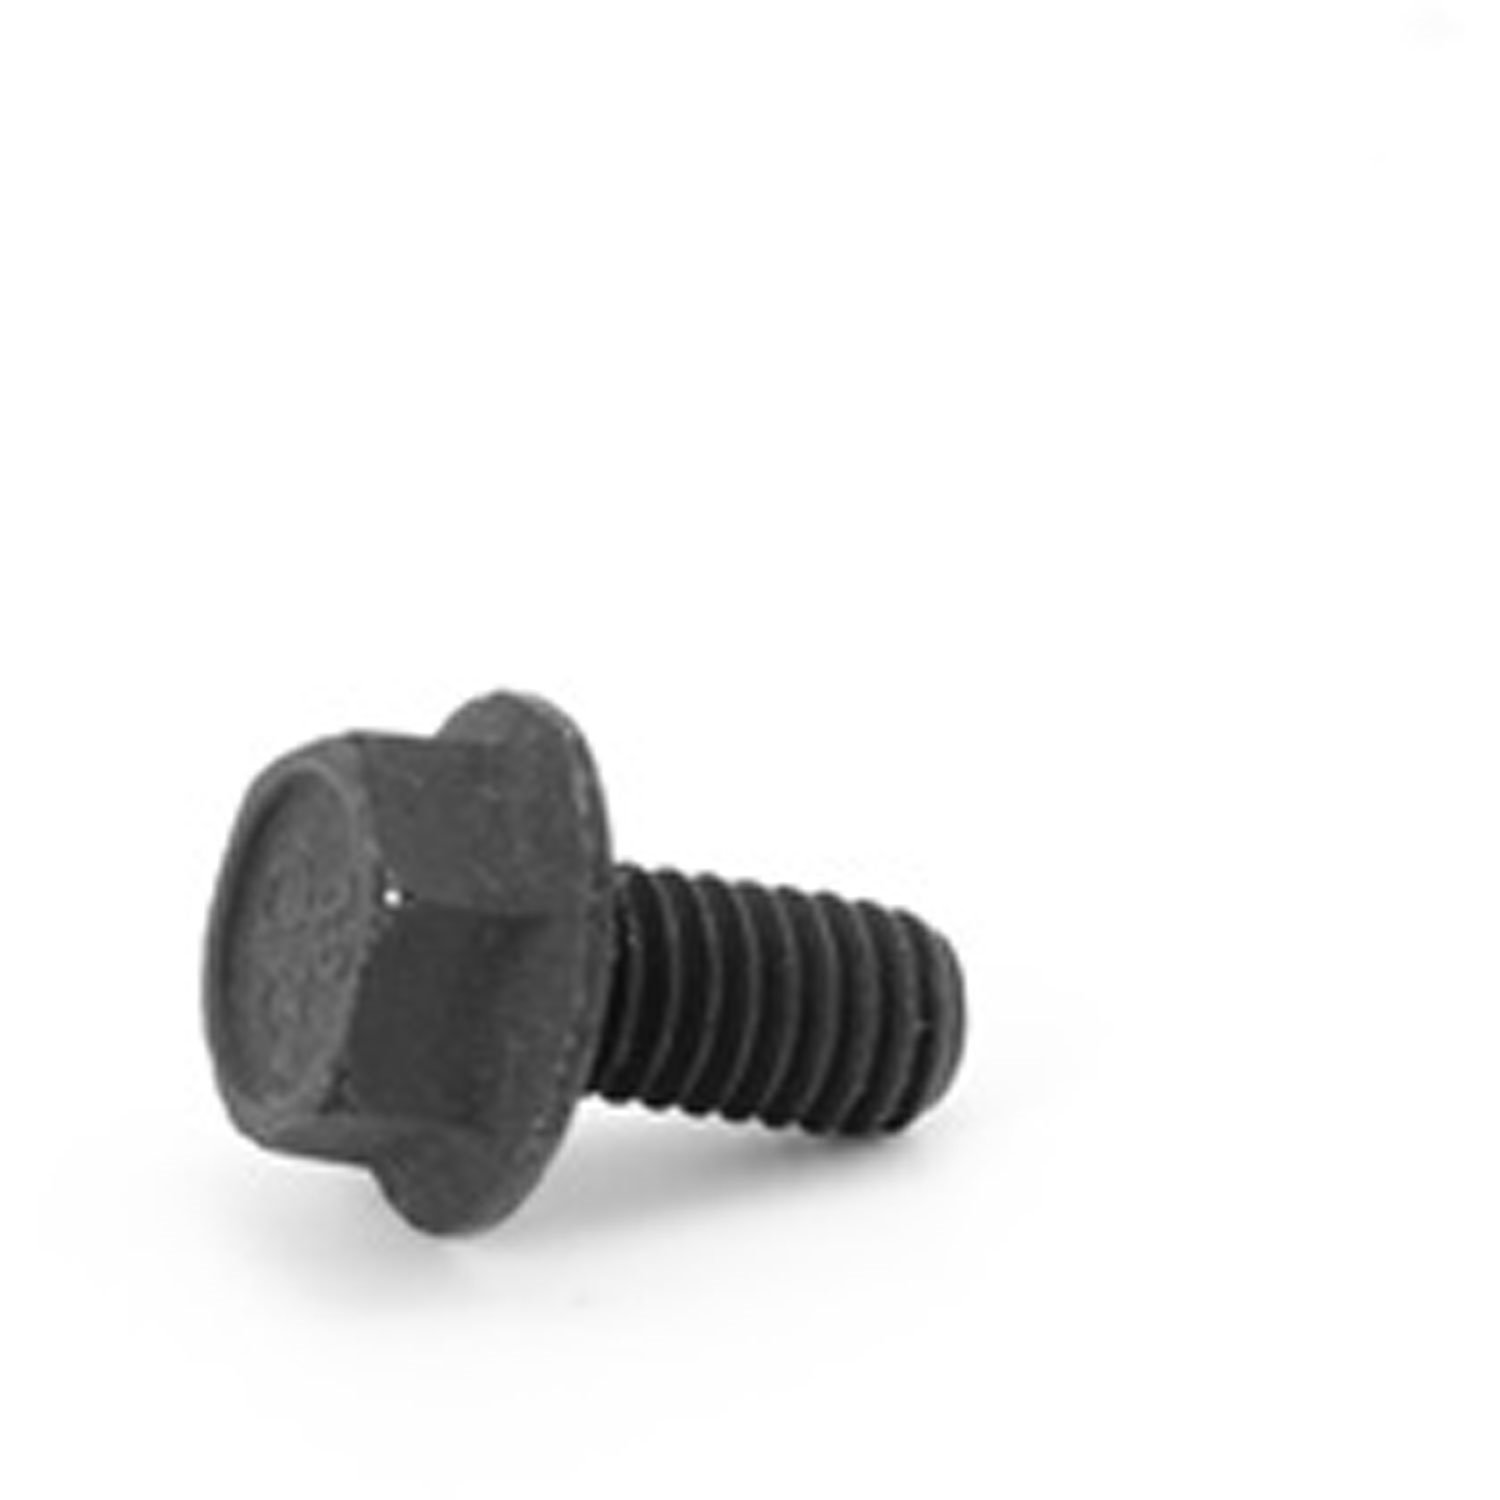 Replacement differential cover bolt from Omix-ADA for AMC 20 and for Dana 30 and for Dana 44 differential covers.